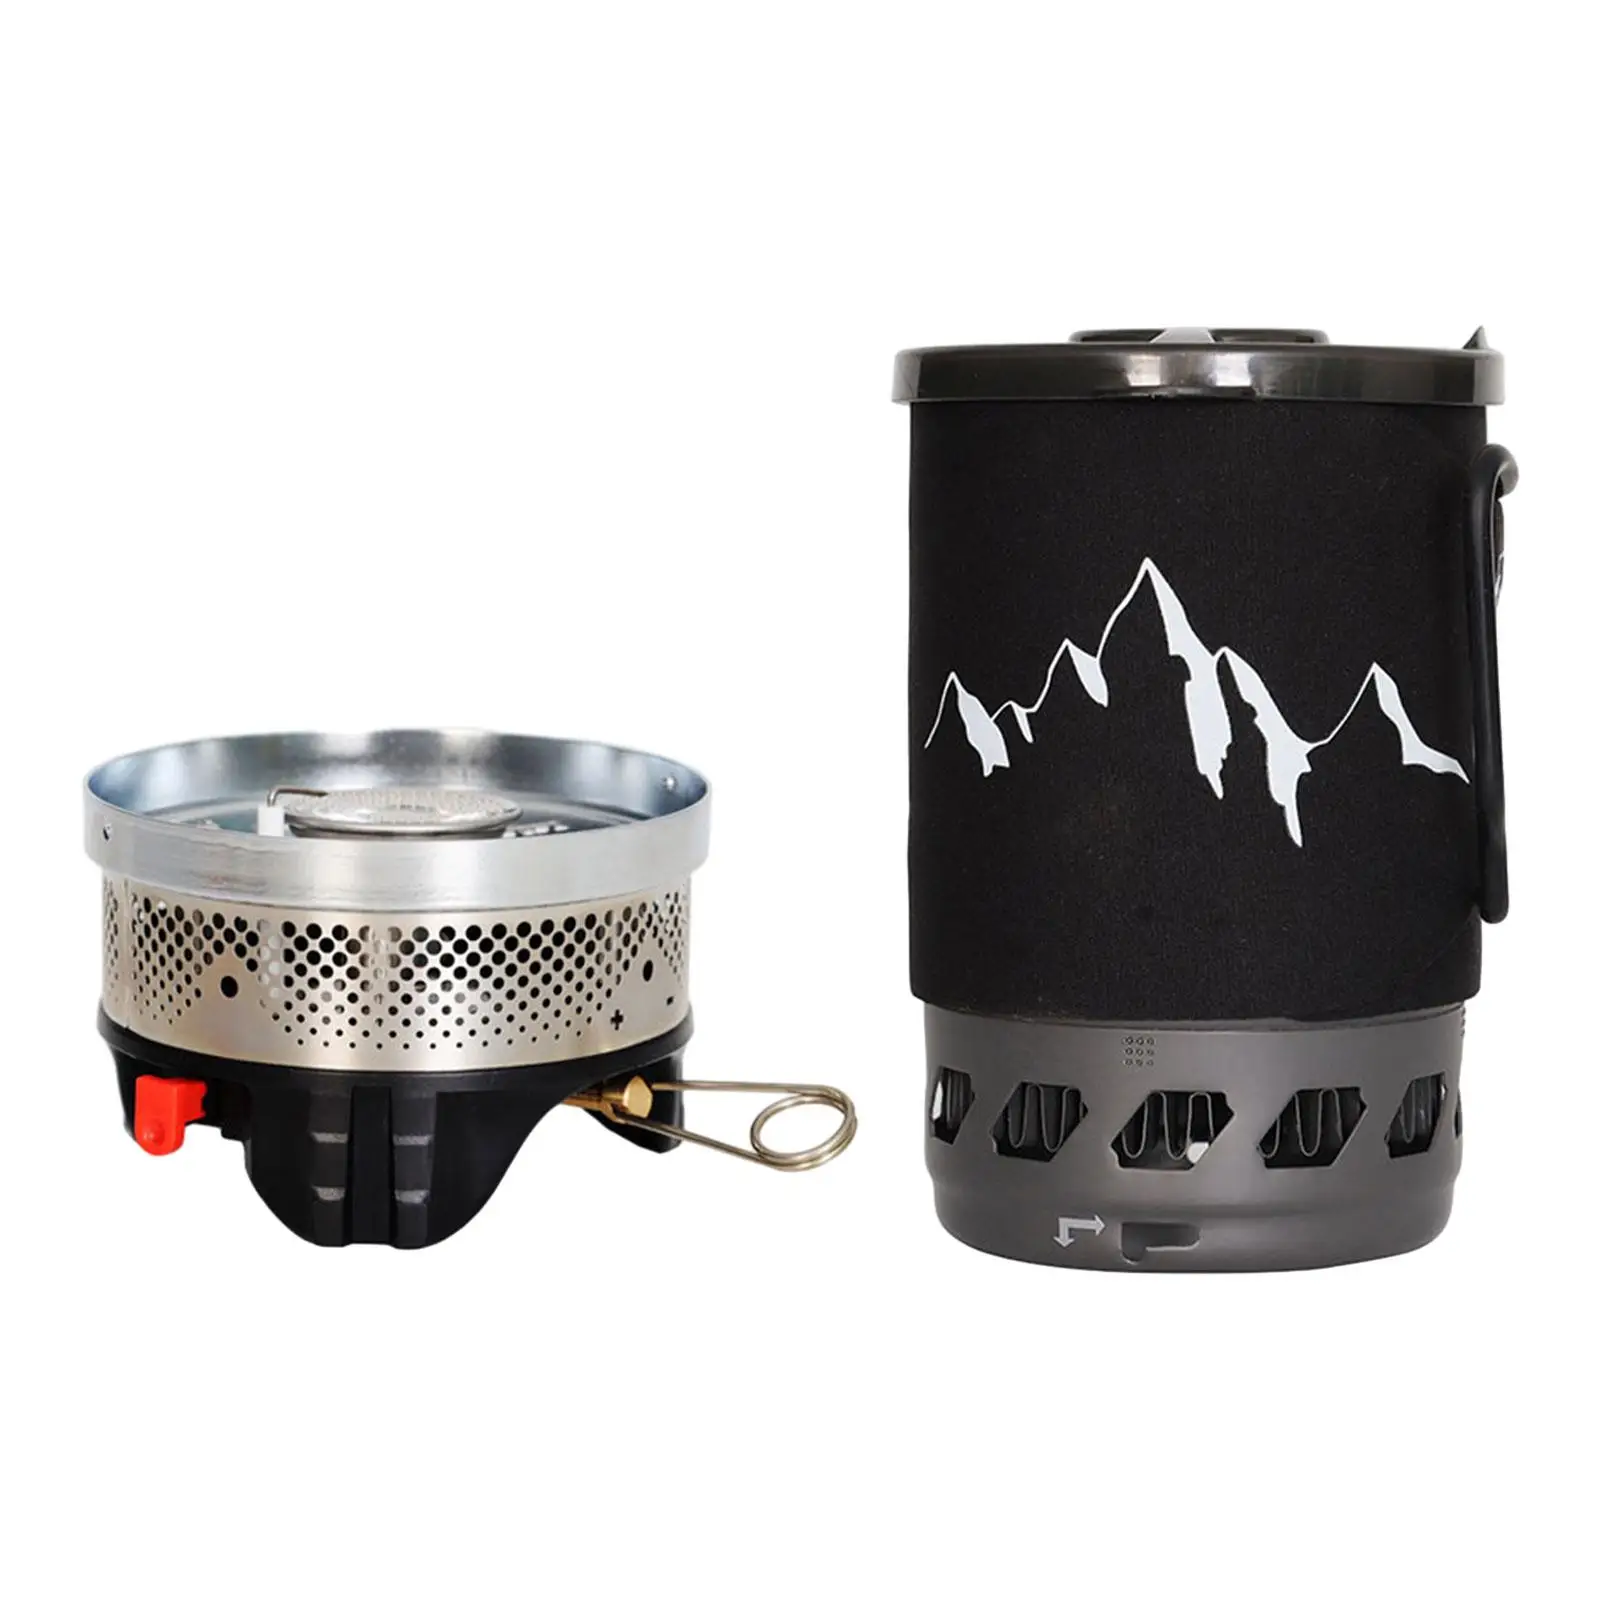 Camping Gas Stove with Carrying Bag Outdoor Stove Ultralight Backpacking Stove Gas Burner for BBQ Picnic Garden Hiking Cooking